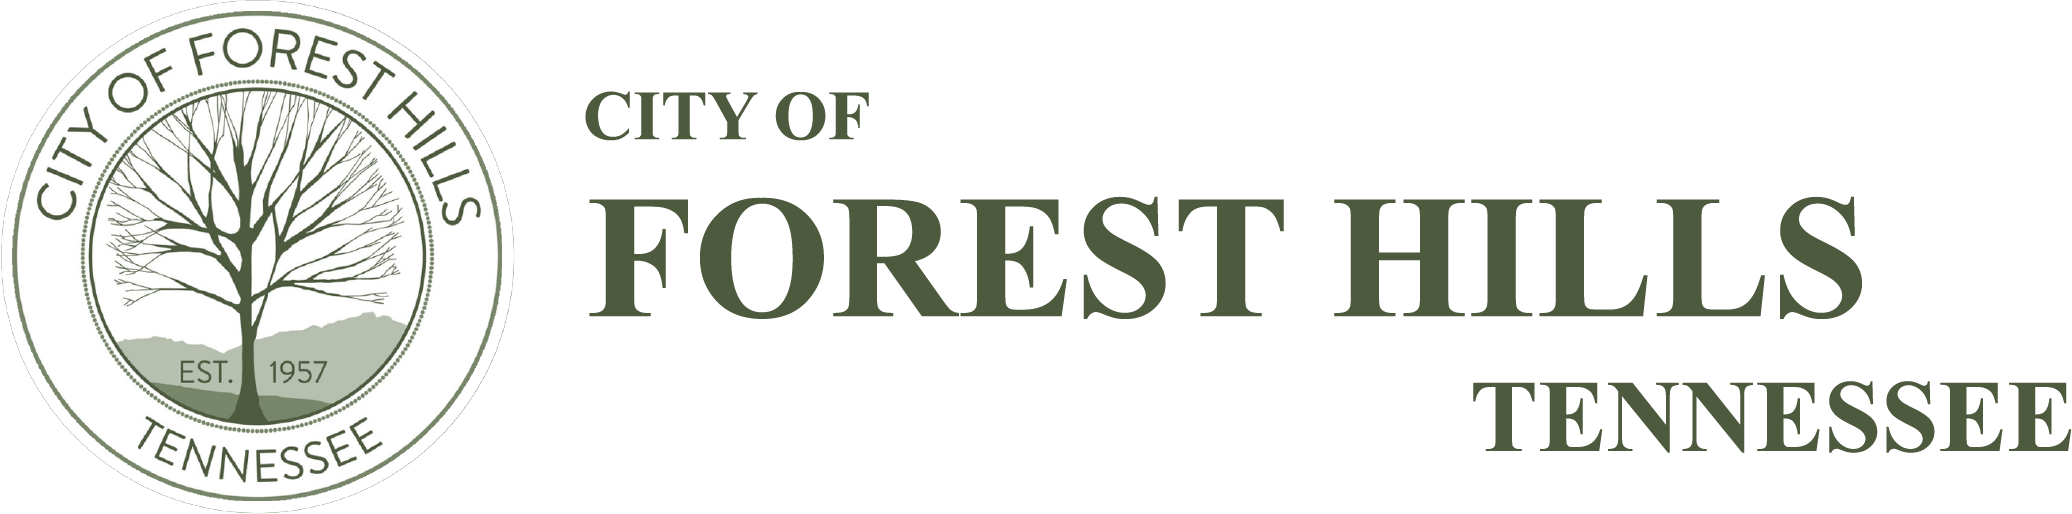 city of forest hills logo